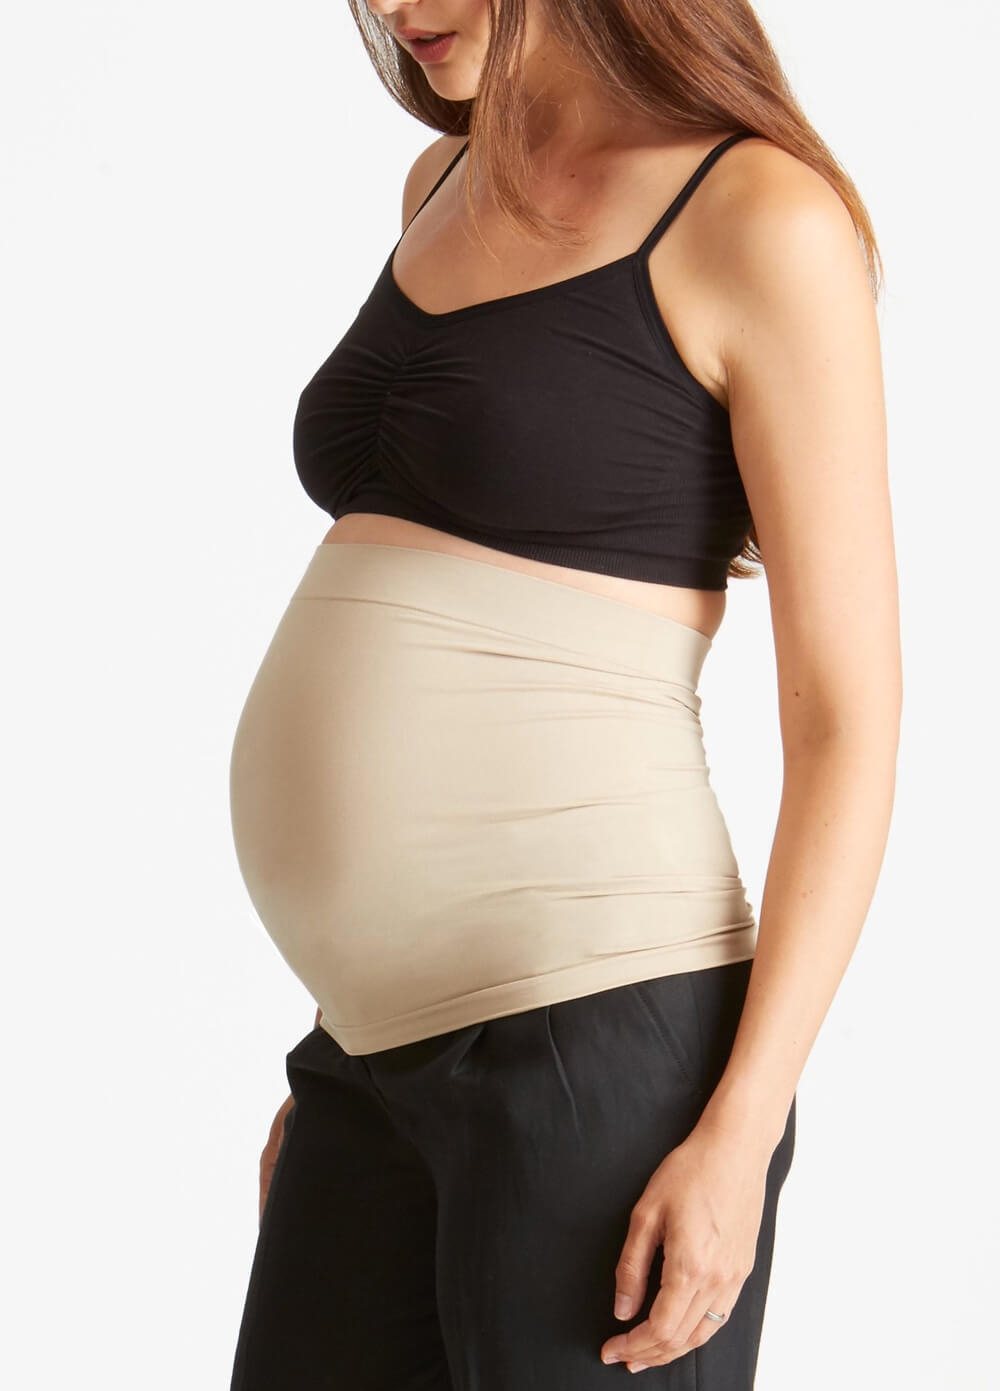 Bellaband Maternity Belly Band In Nude by Ingrid & Isabel